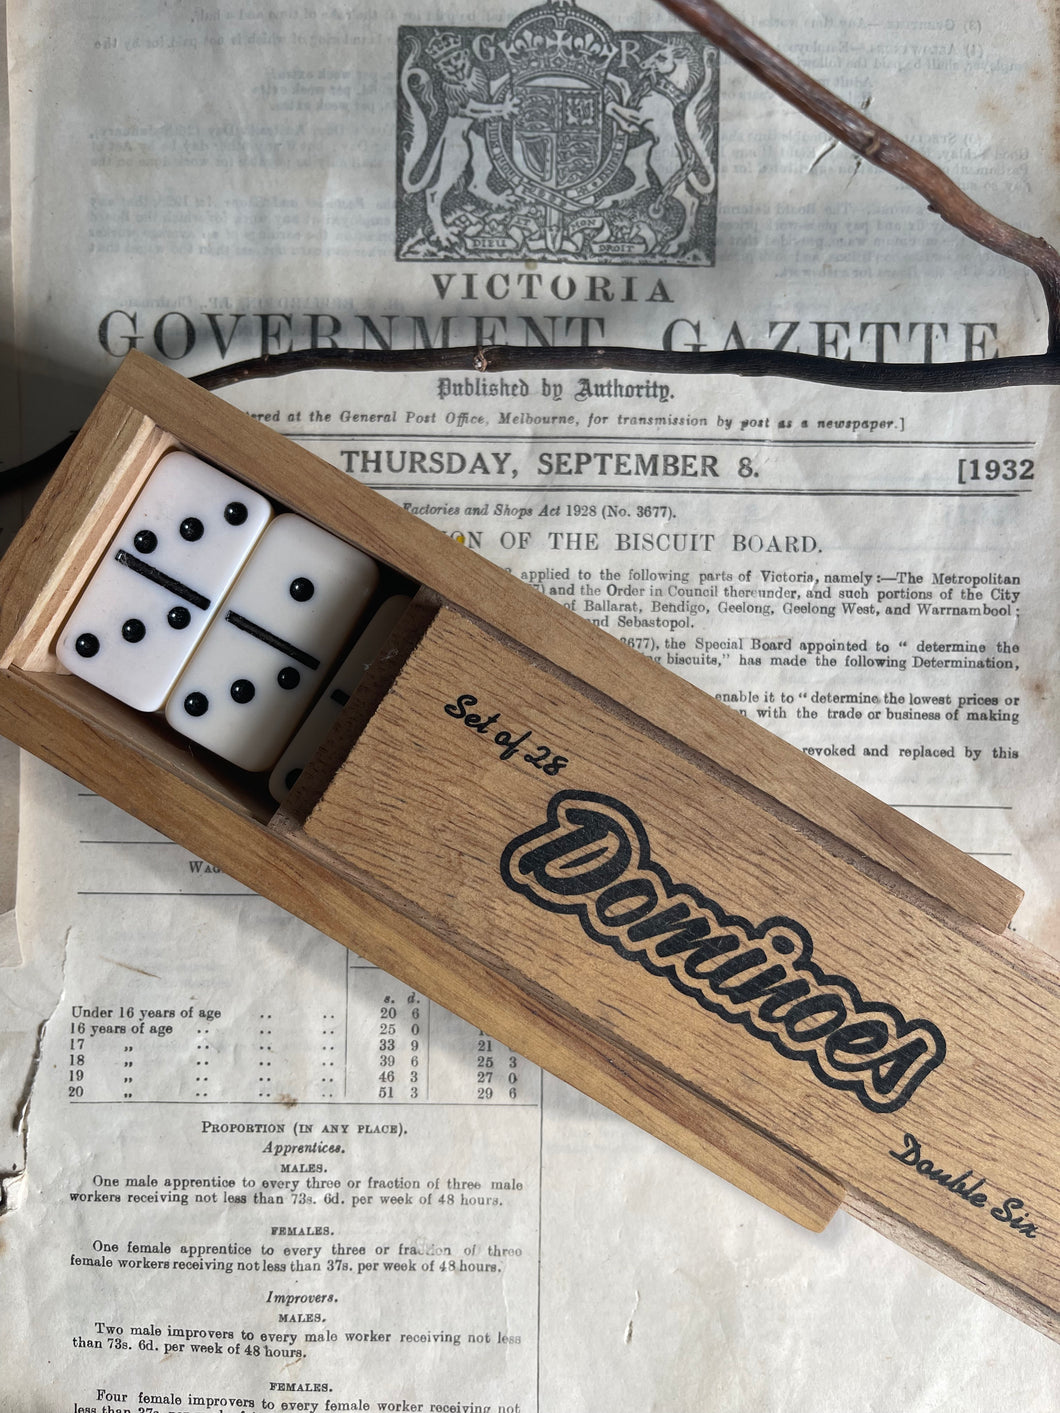 Vintage Double Six Ivory Boxed Dominoes.